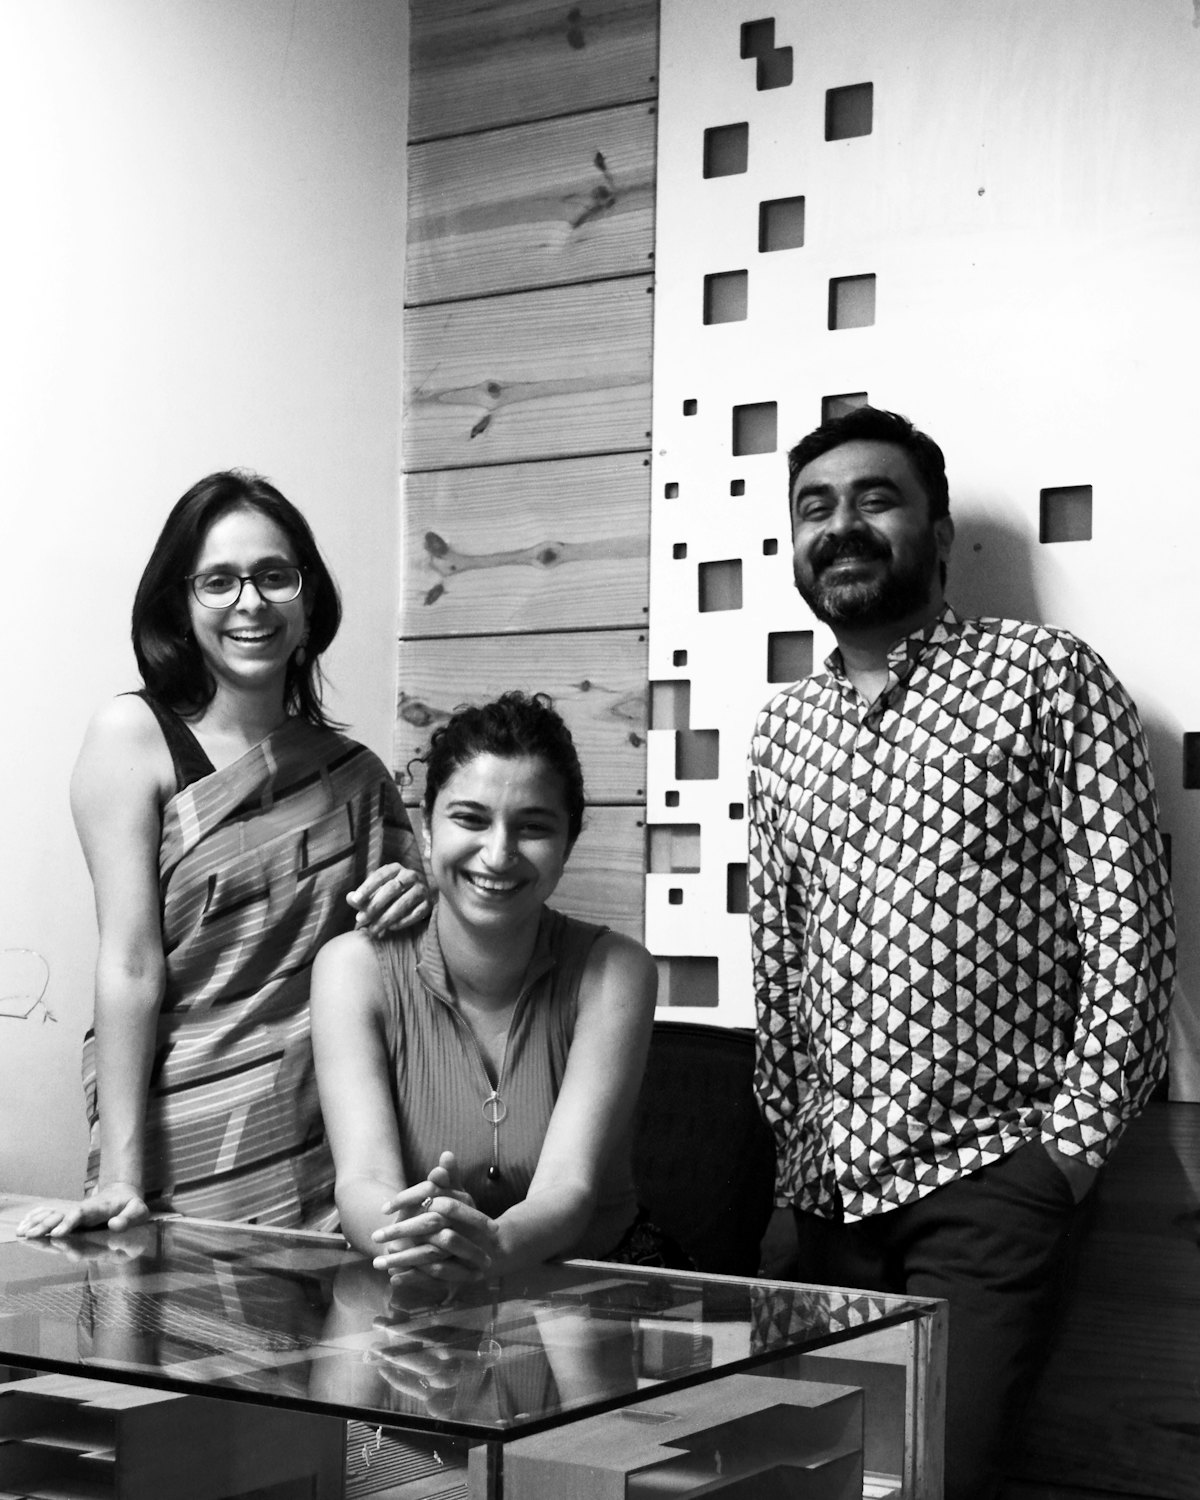 The founding partners of SpaceMatters, architecture firm that is designing the Baha’i House of Worship in Bihar Sharif, India. From left to right, Moulshri Joshi, Amritha Ballal, and Suditya Sinha.